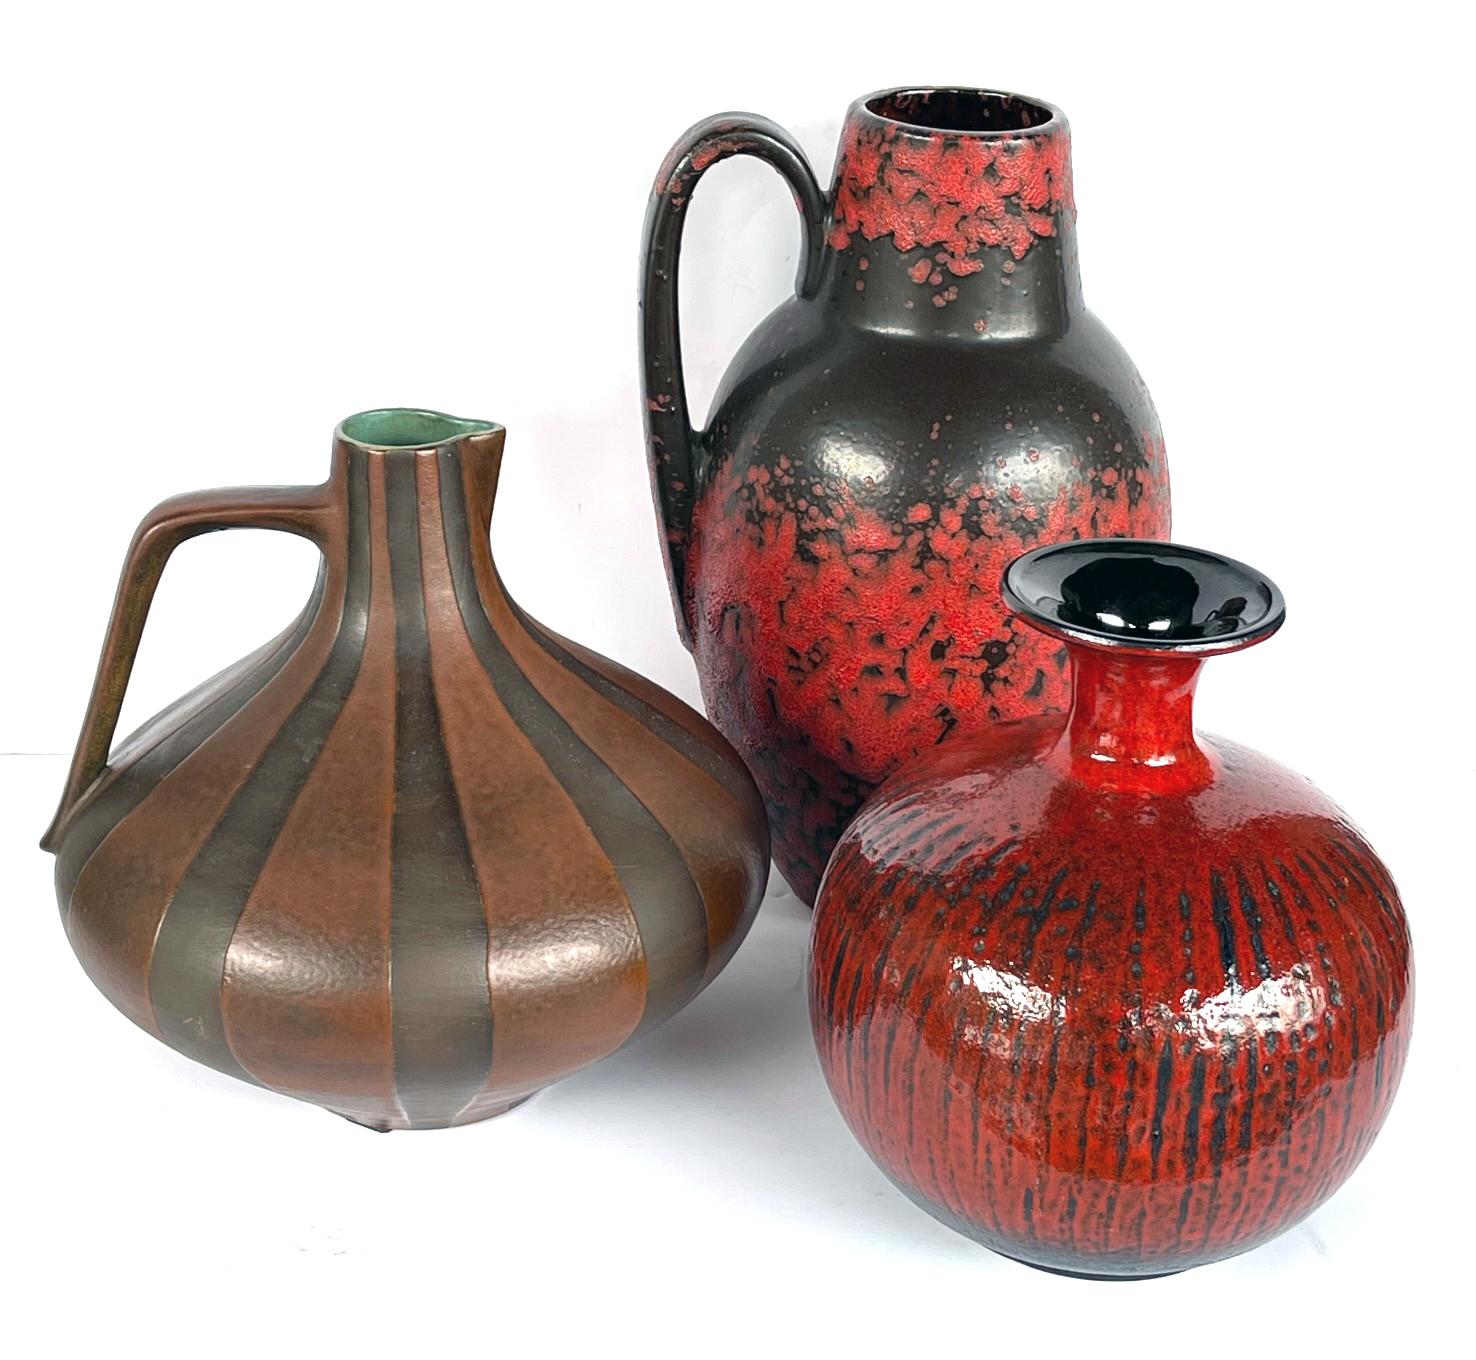 With cylindrical spout above a bulbous body adorned overall with a fiery red-lava-over-brown glaze.